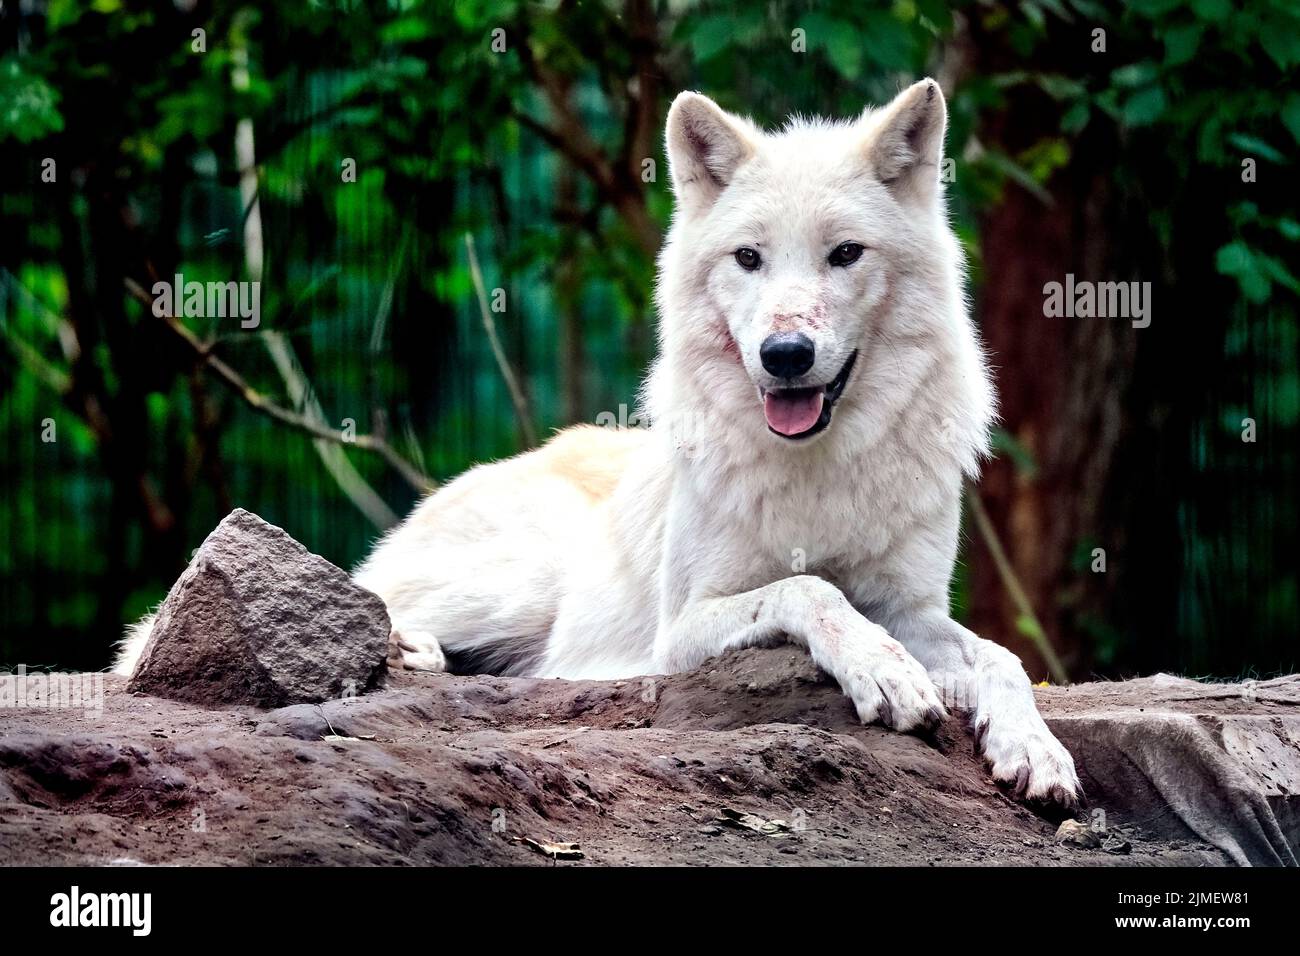 Arctic wolf, white wolf or arctic wolf (Canis lupus arctos). Stock Photo